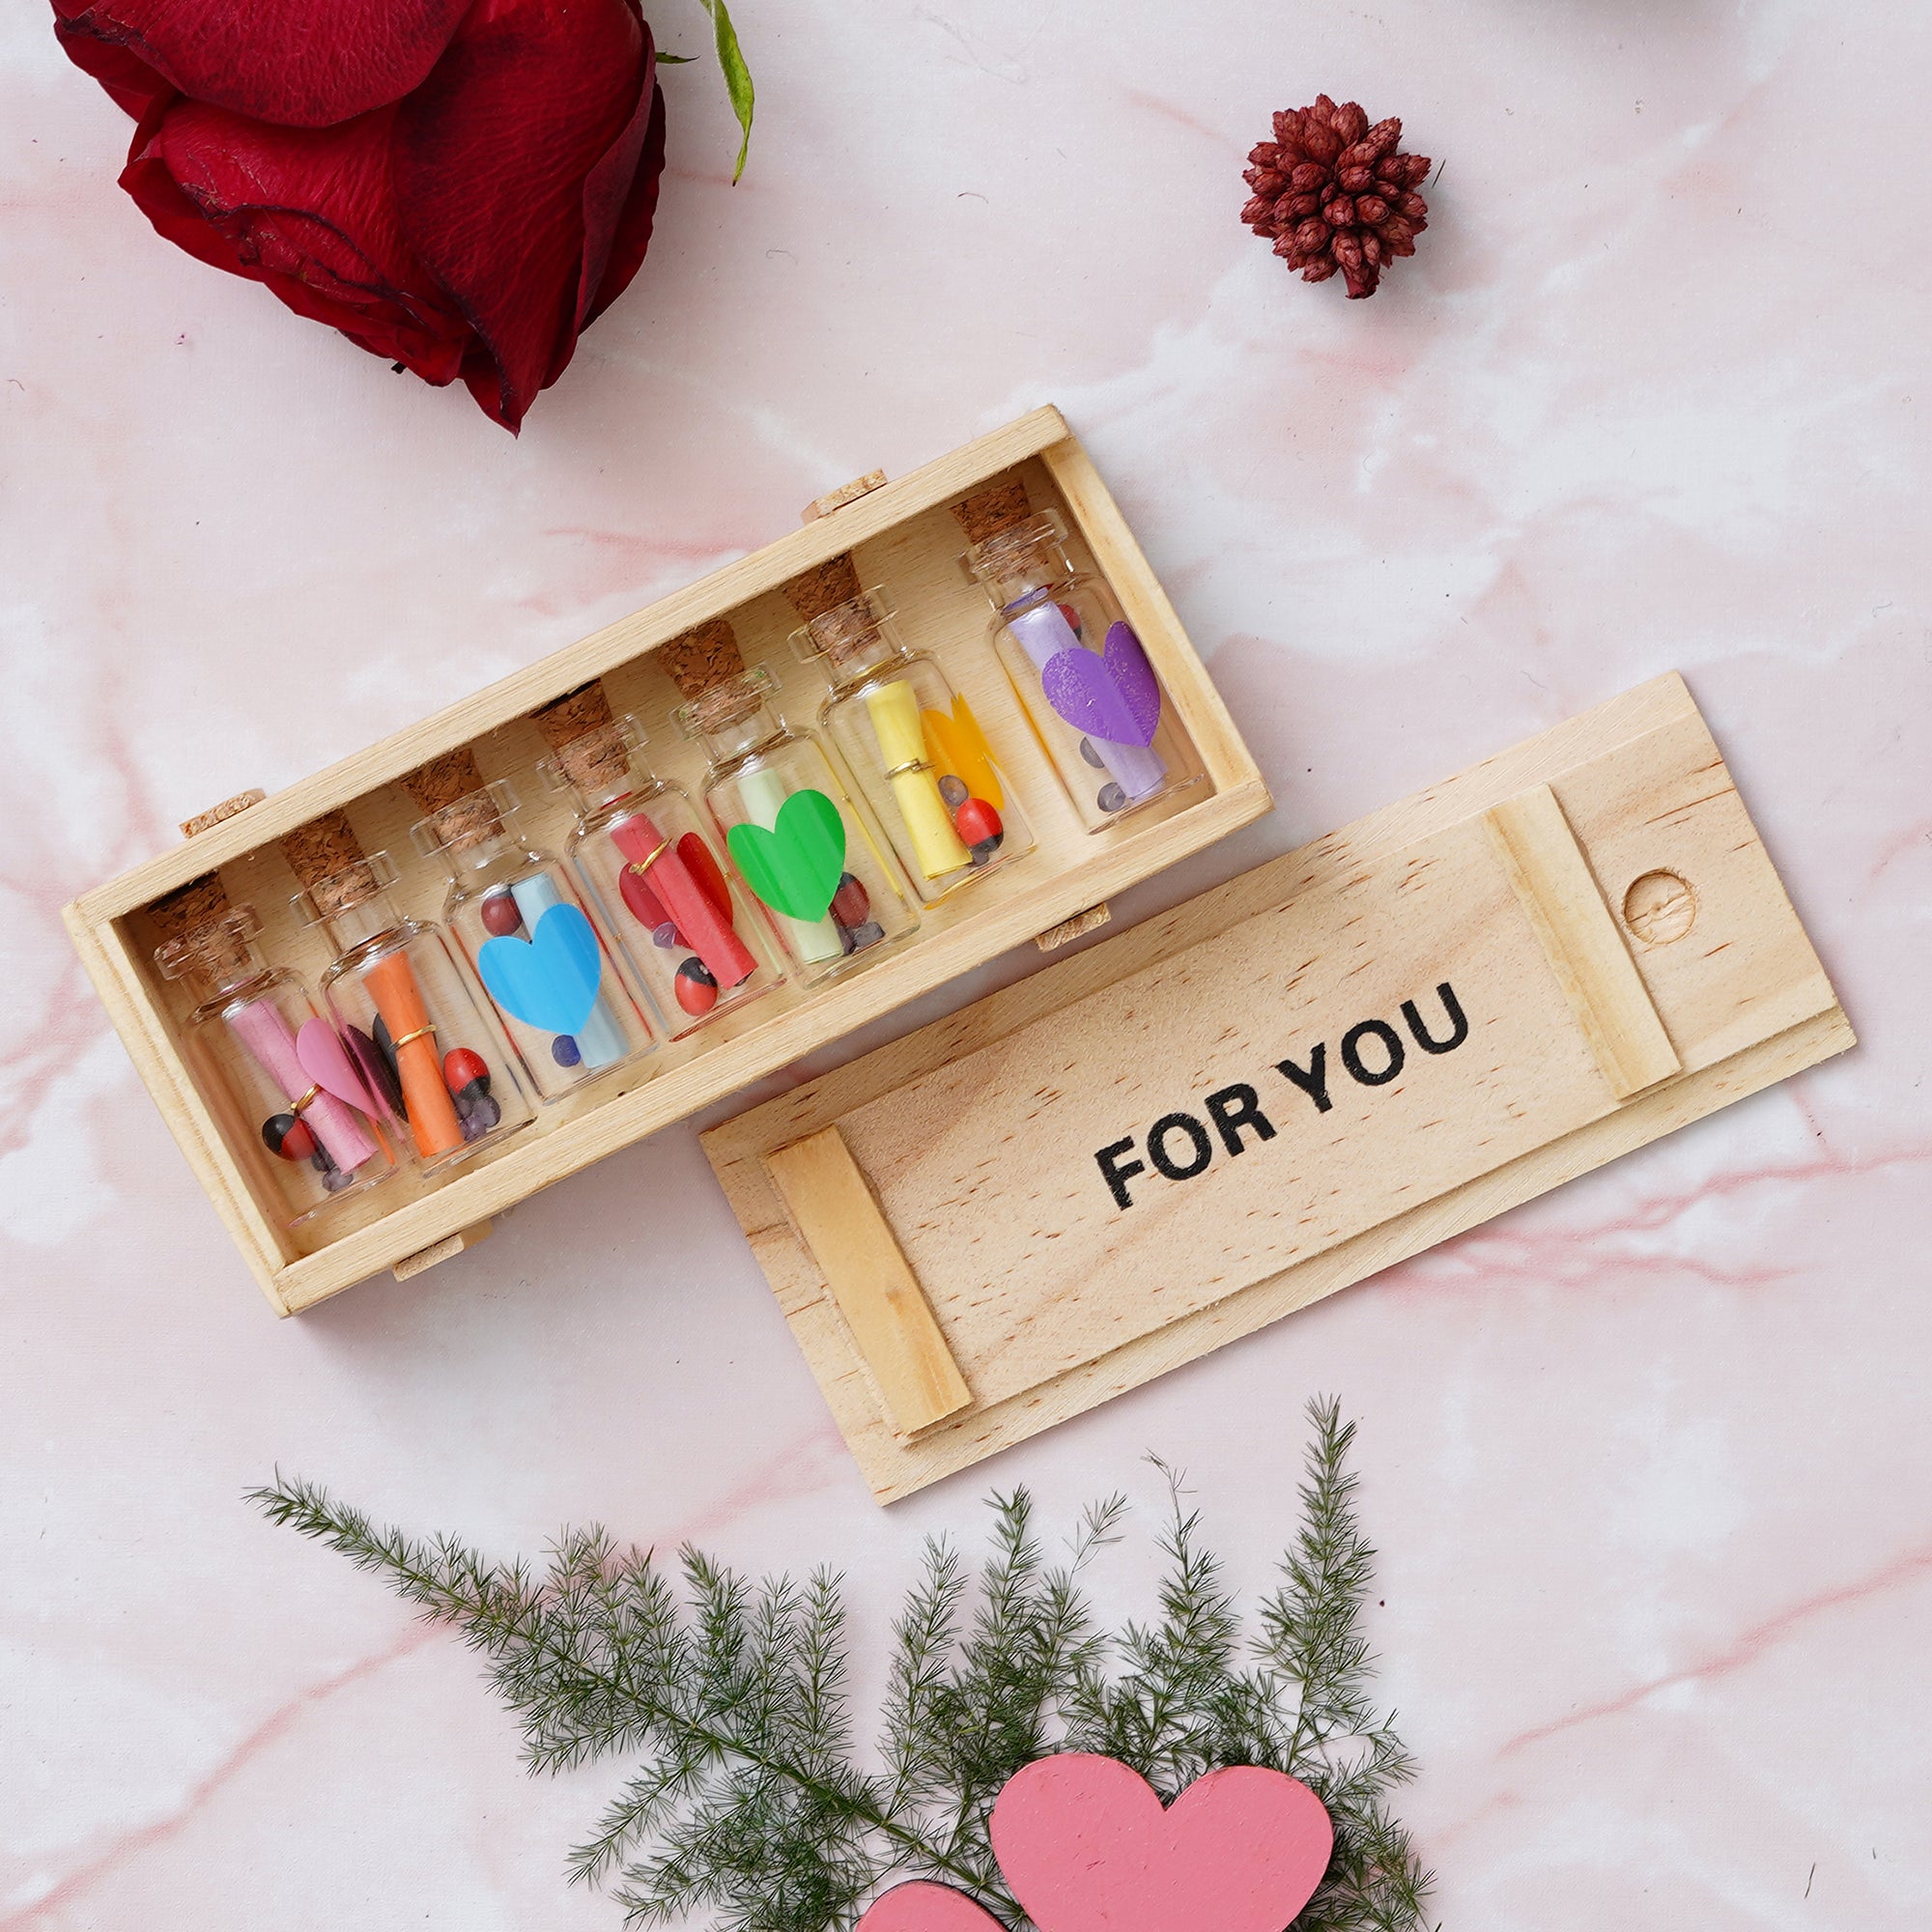 Valentine Combo of Set of 8 Love Post Cards Gift Cards Set, Red Gift Box with Teddy & Roses, Wooden Box "For You" Message Bottle Set 5